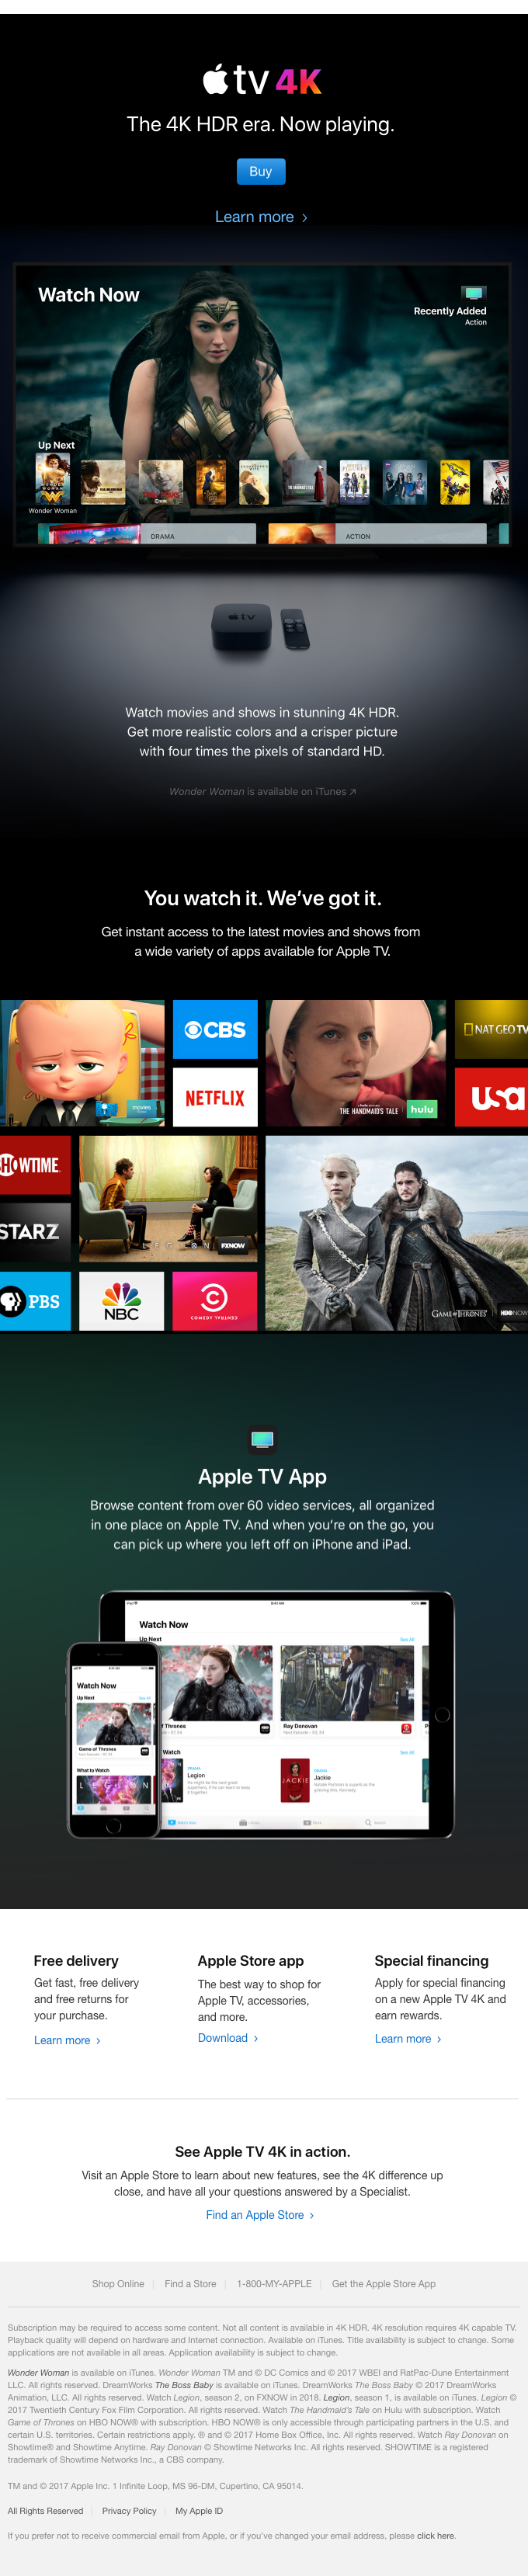 You haven’t seen anything like Apple TV 4K.